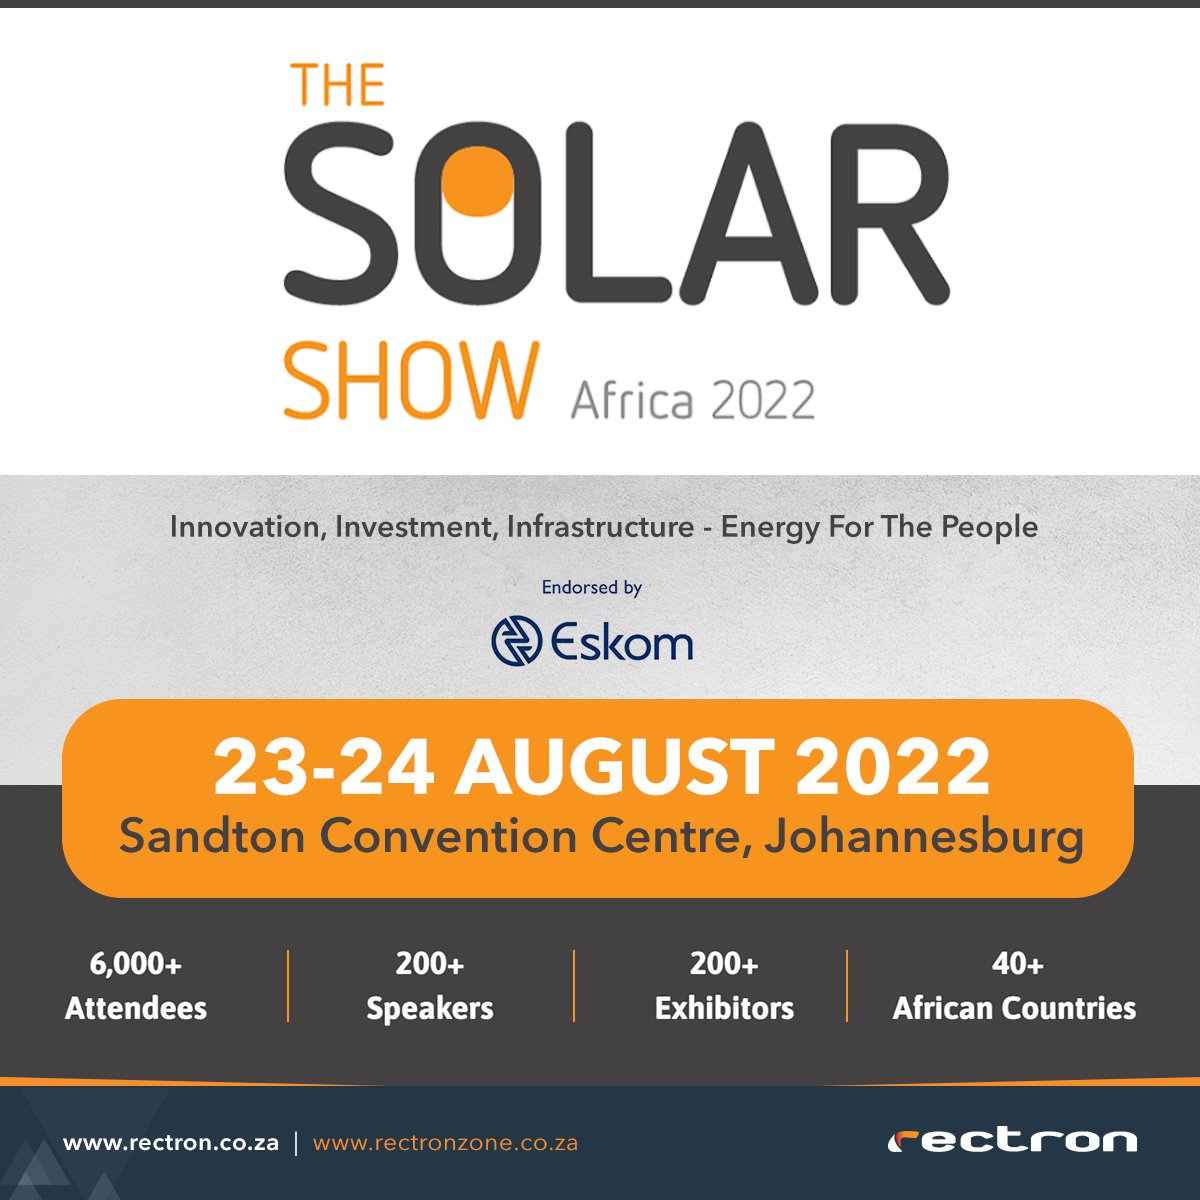 Join us at the Solar Show Africa Convention 2022 where we'll be showcasing the new #EcoFlow range!

23-24 August 2022 | Sandton Convention Centre, Johannesburg

Register now for a FREE pass! 🔗 loom.ly/Ap7aa3c

#SolarShowAfrica2022 #Solar #PowerConvention